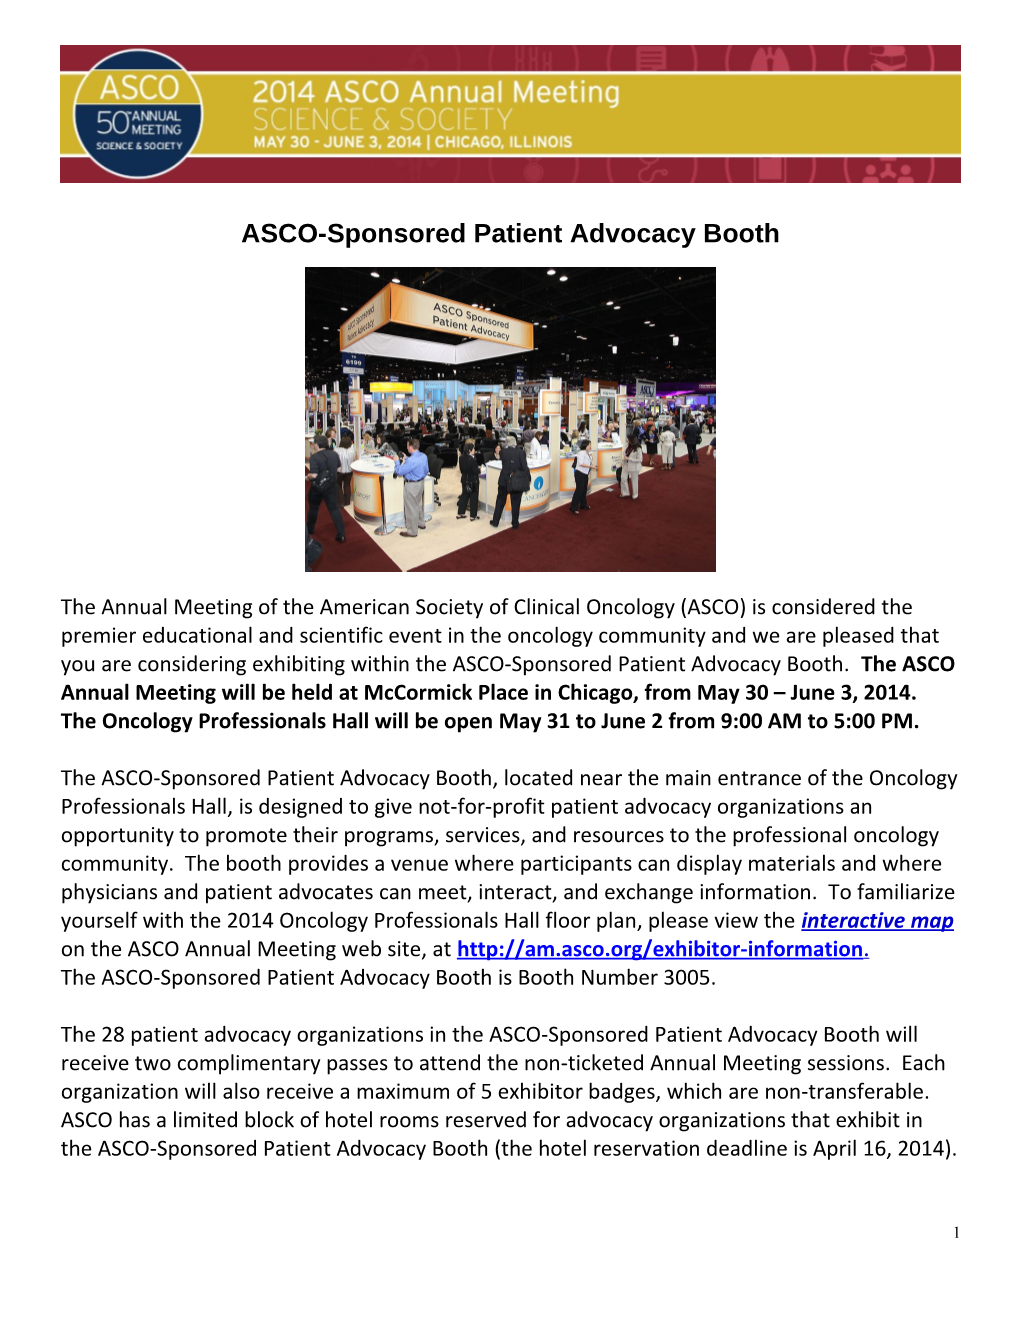 ASCO-Sponsored Patient Advocacy Booth